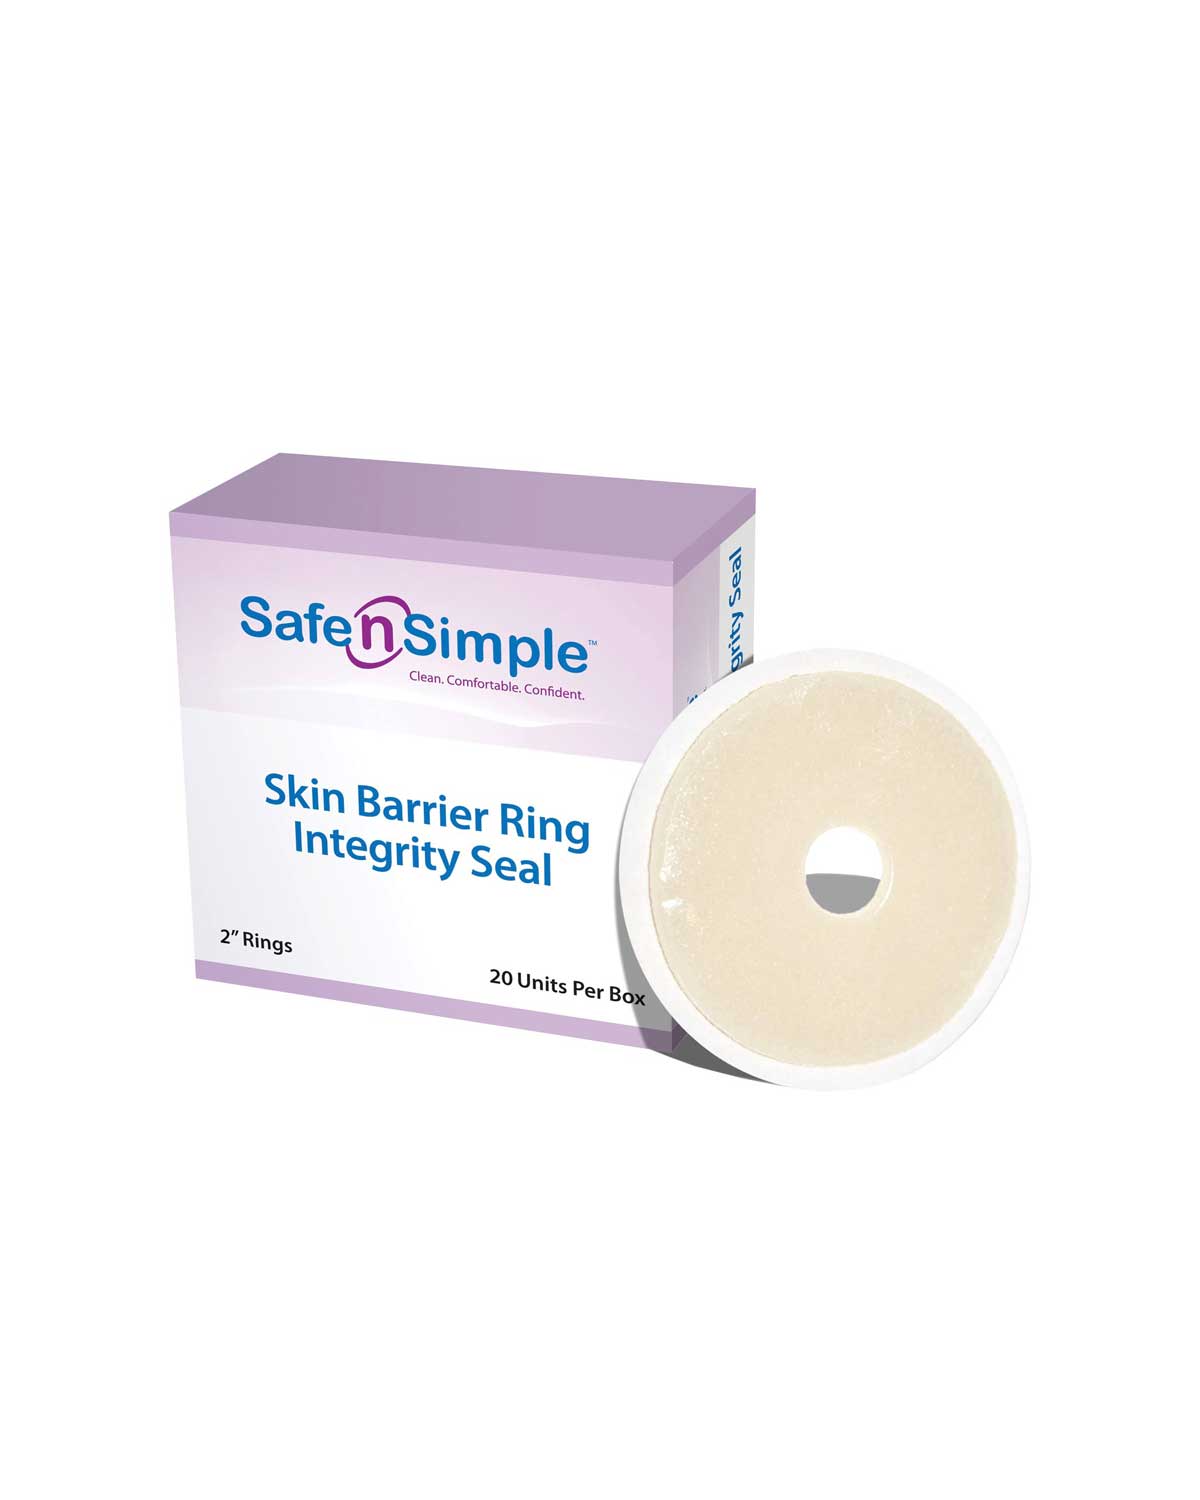 Safe n Simple Integrity Skin Barrier 2" Ring - 20 per box